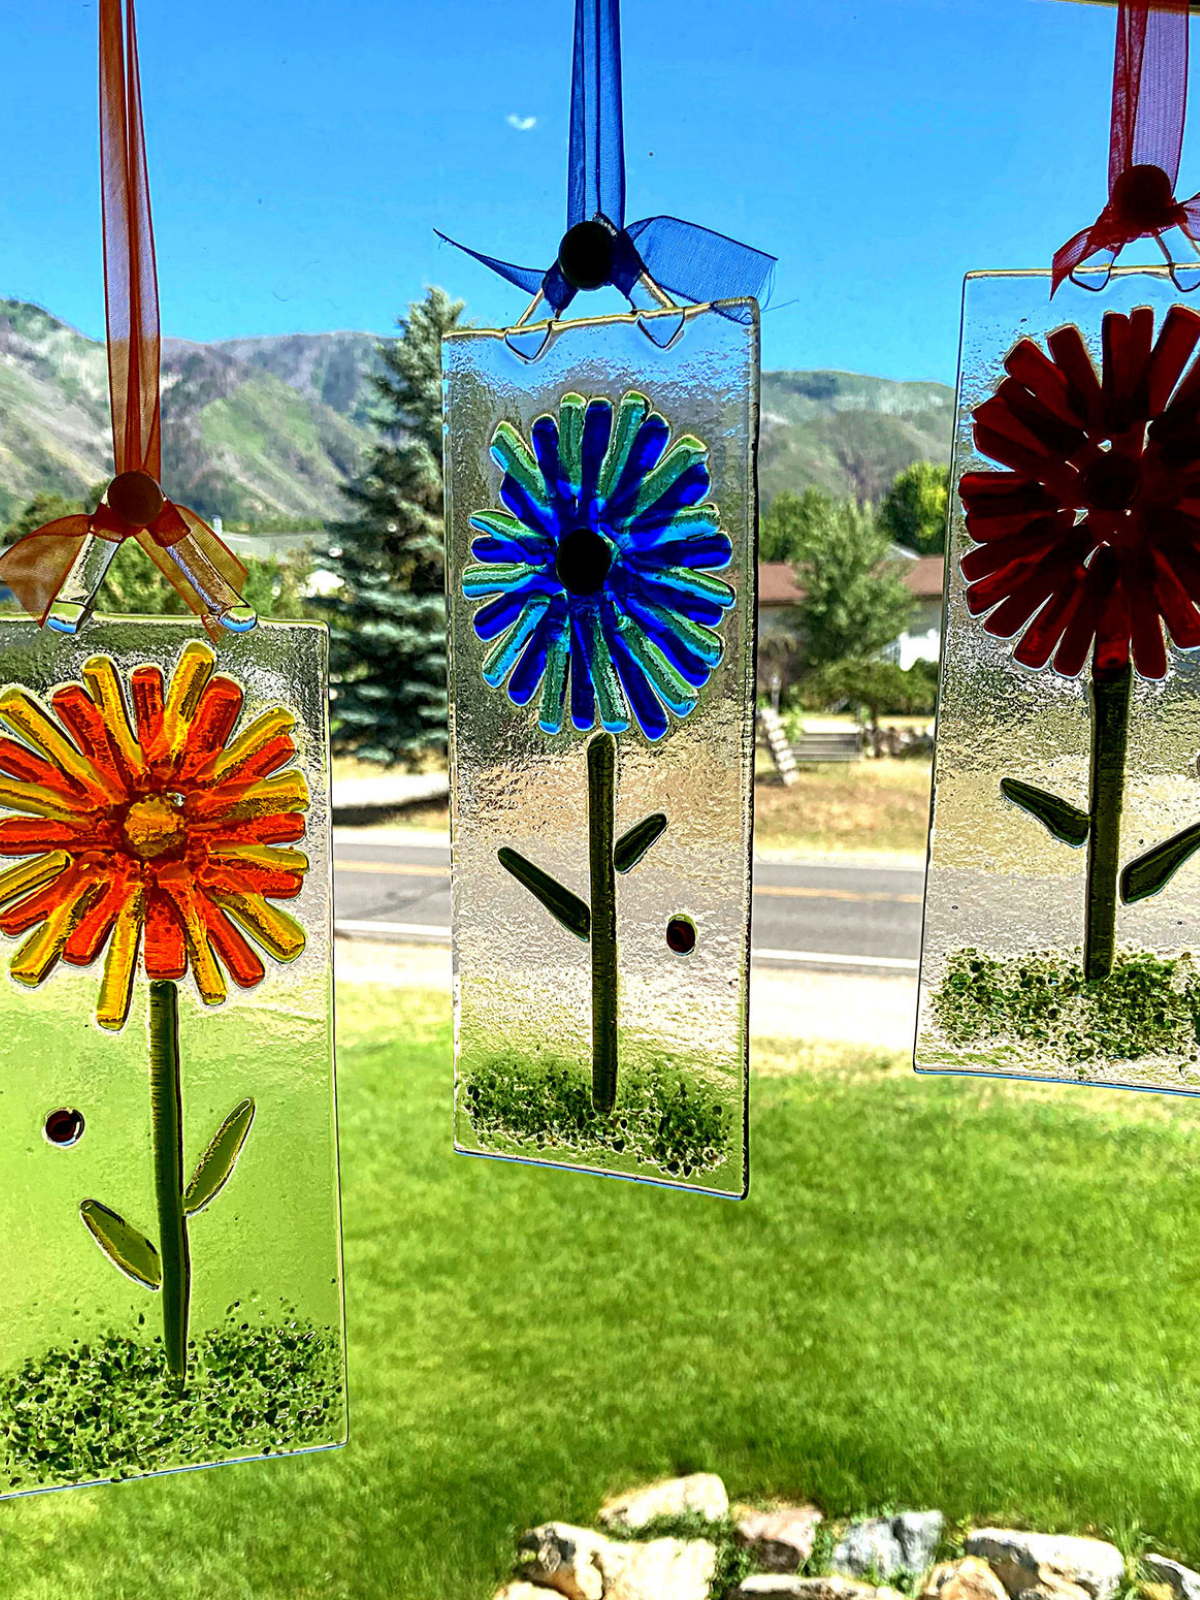 Fused Glass Flowers: Bowls, Sun Catchers, and Table Art